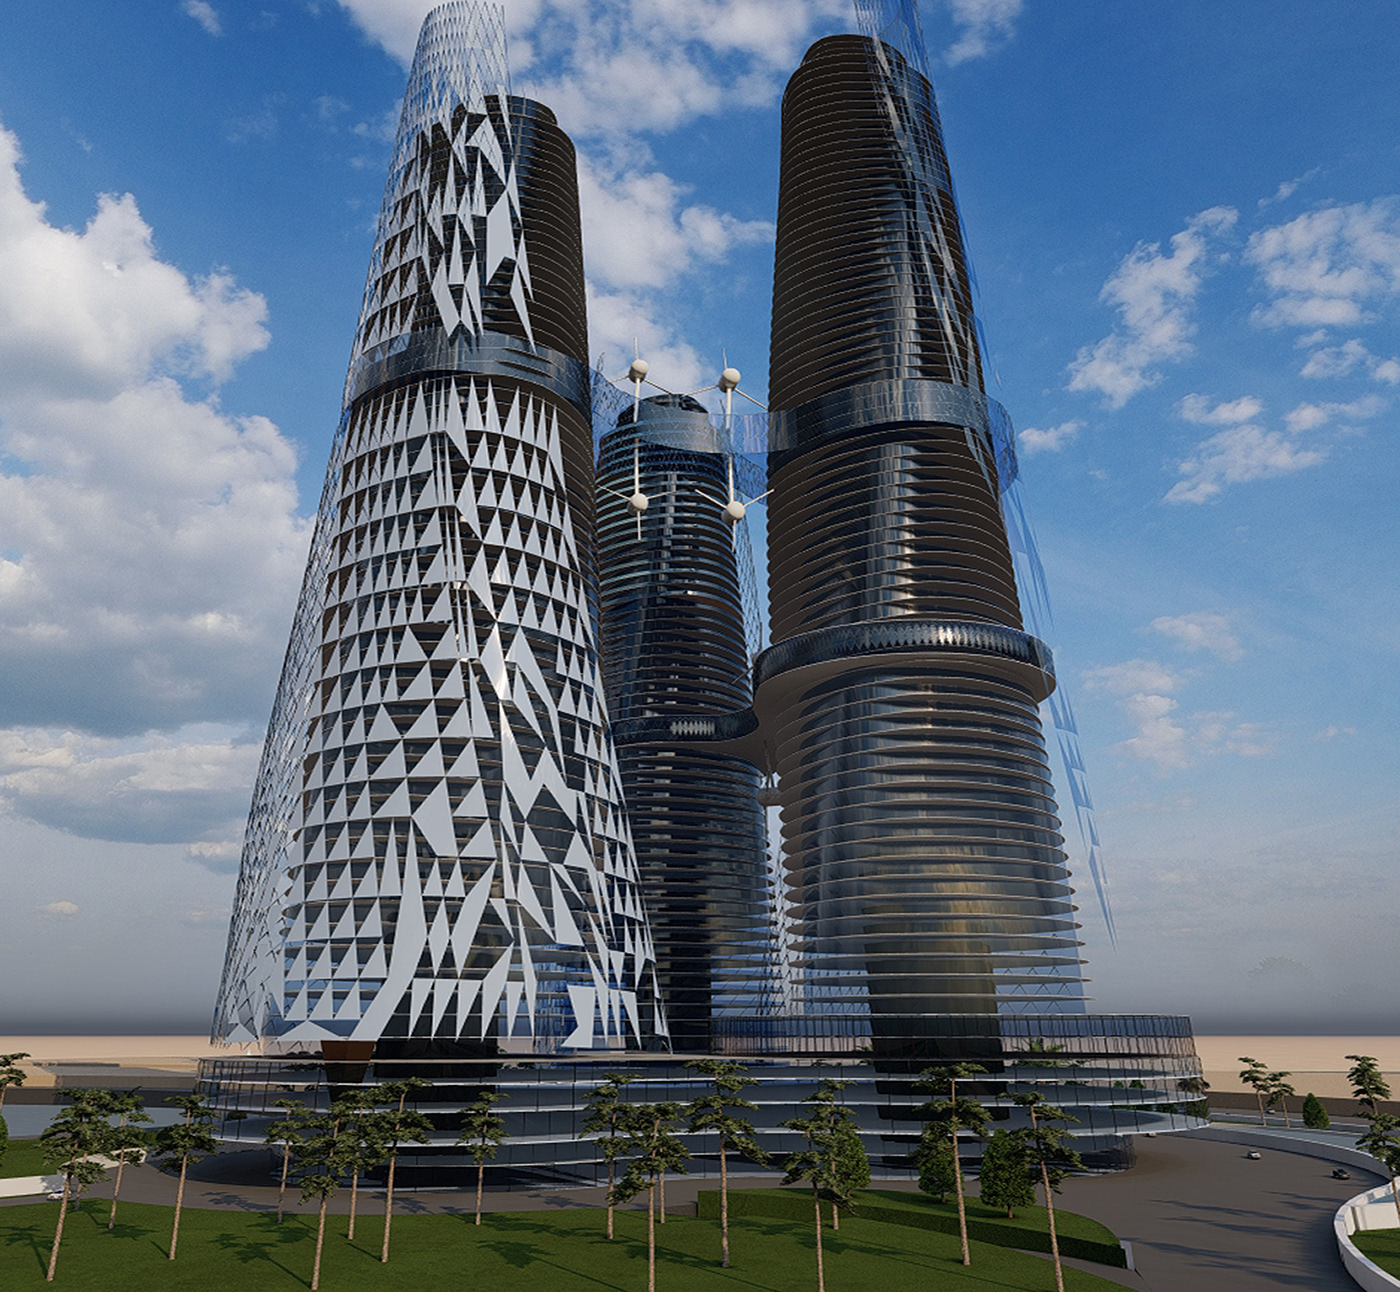 3ds max alalamein architecture exterior graduation Lumion Render Render skyscapes skyscraper towers